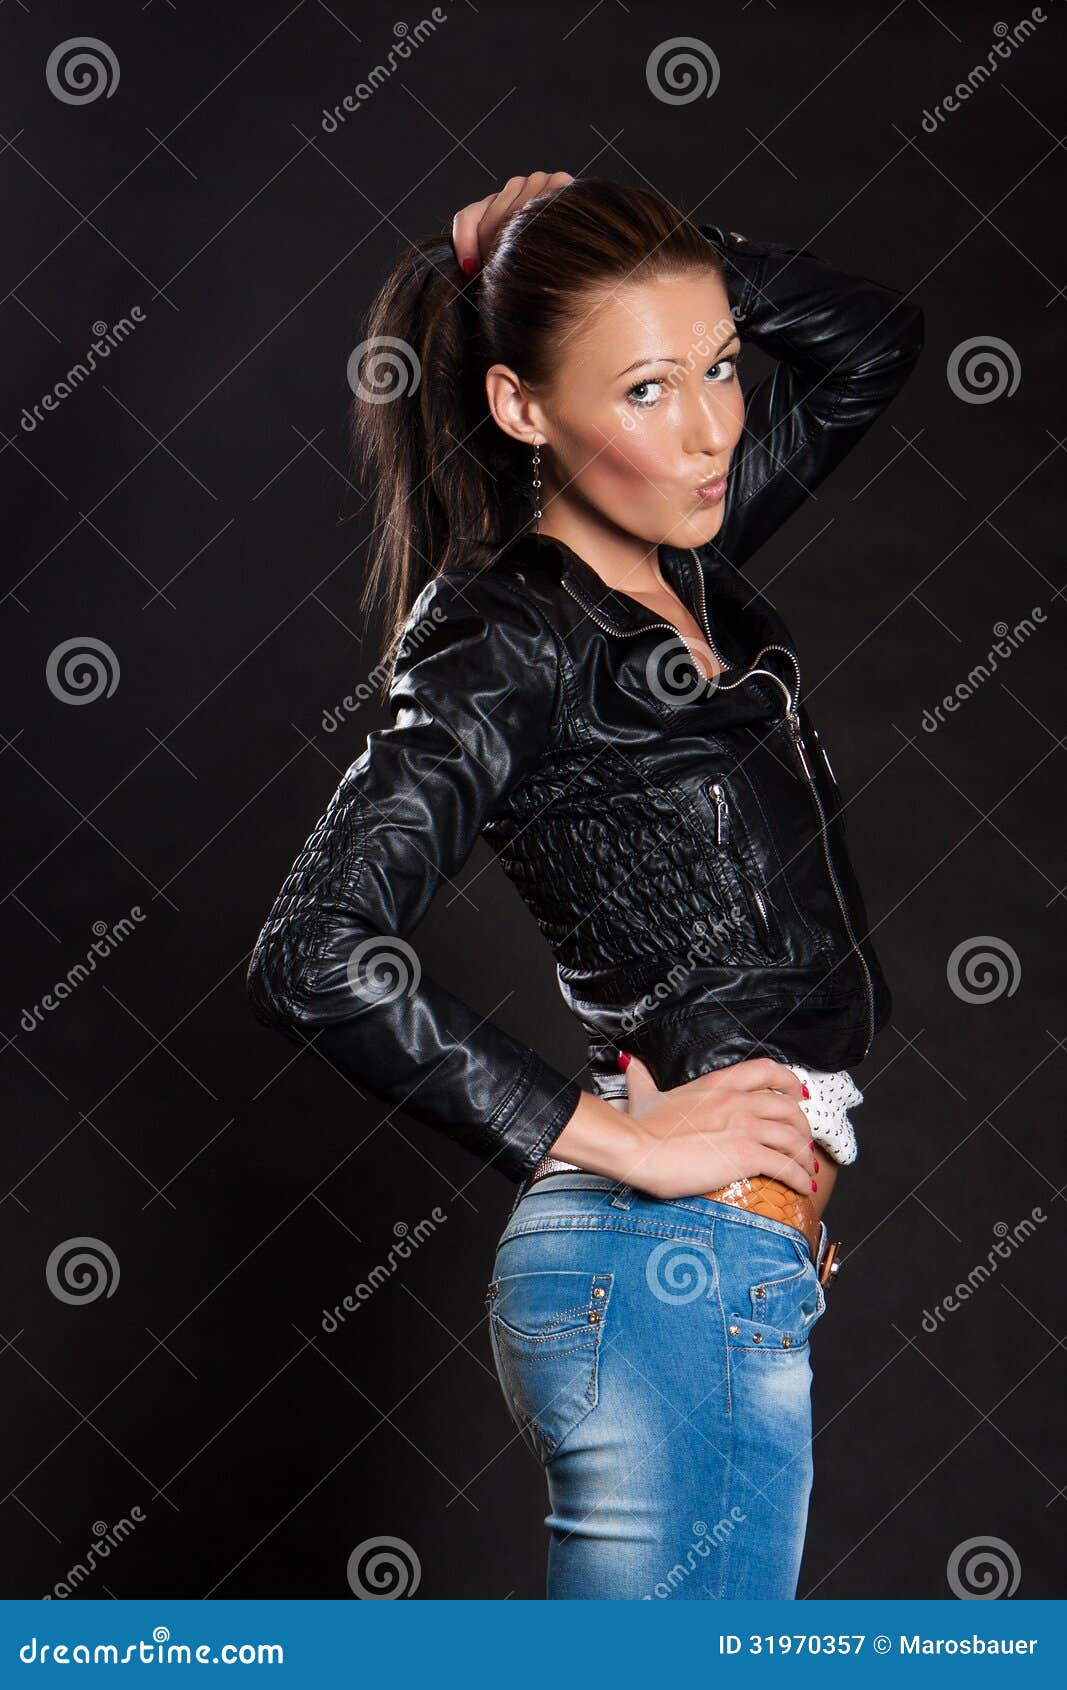 Long-haired Woman In A Leather Jacket Stock Image - Image of beauty ...